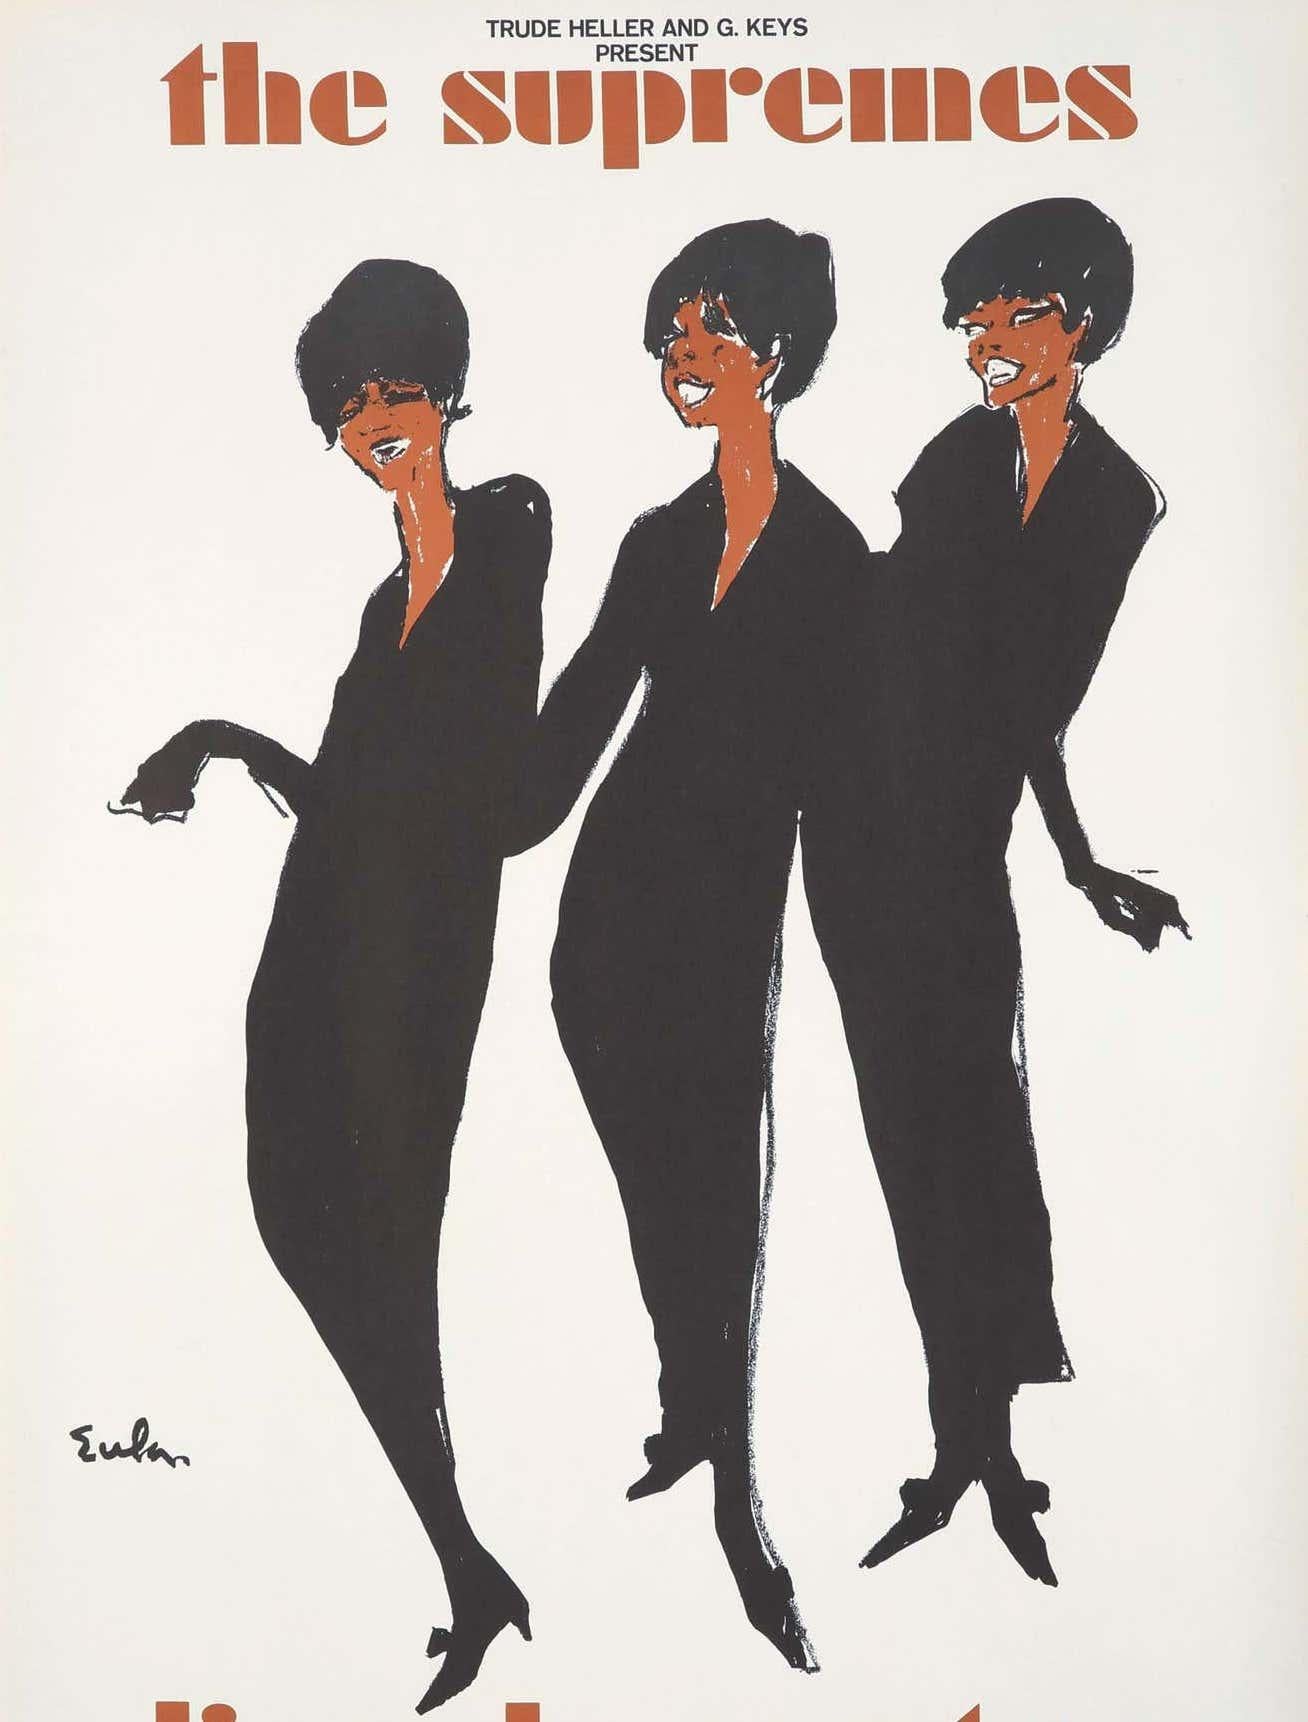 Joe Eula, vintage original The Supremes promo poster:
Among Eula's most famous illustrations, this fashionable and soulful work was published in 1965 to publicize the legendary Motown group's concert at Lincoln Center (10/15/65). 

Off-set